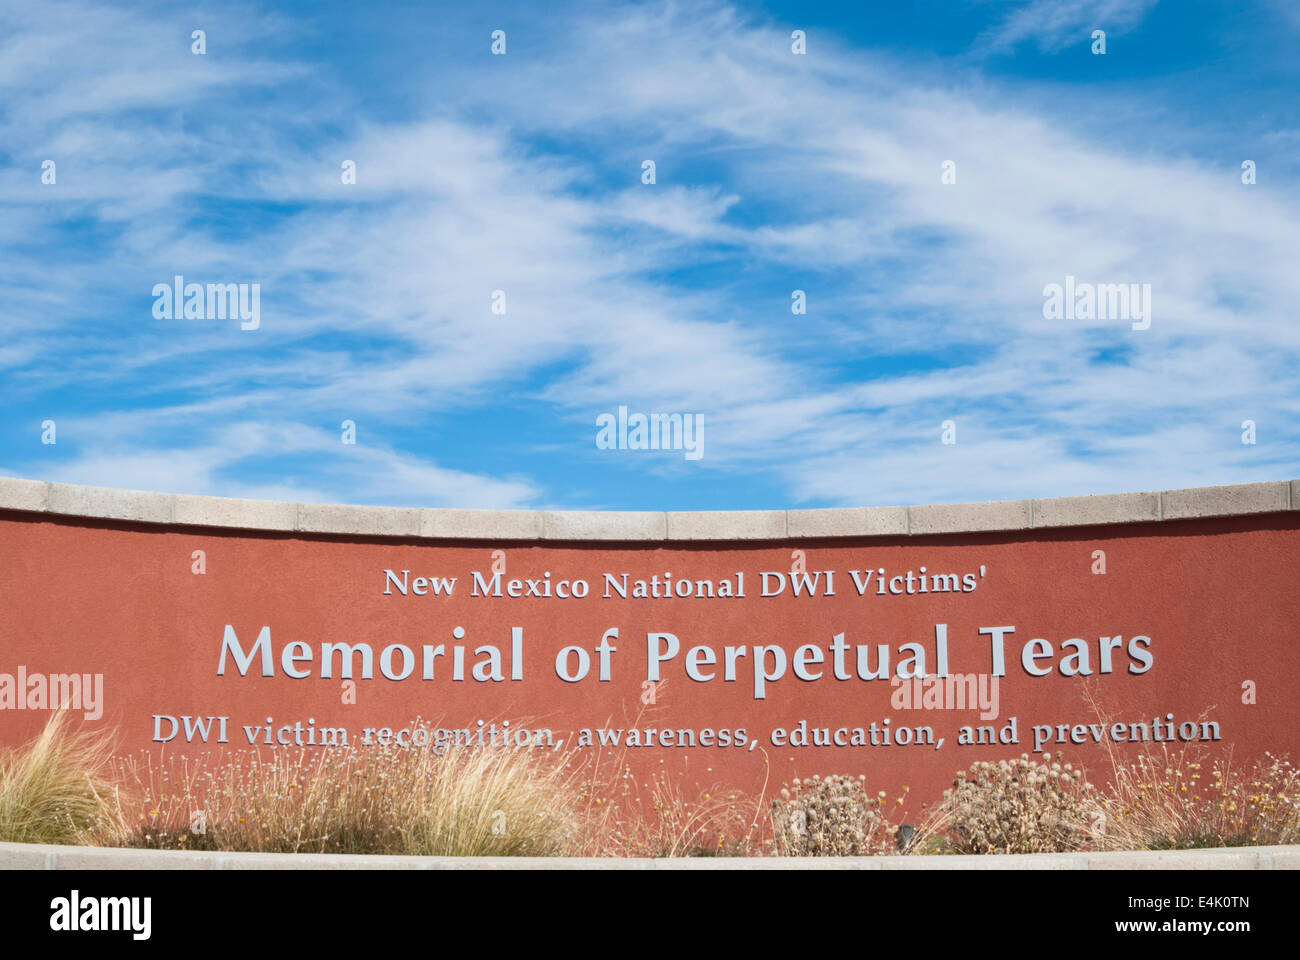 The Memorial of Perpetual Tears is a center for education and awareness of the DWI problem. Stock Photo